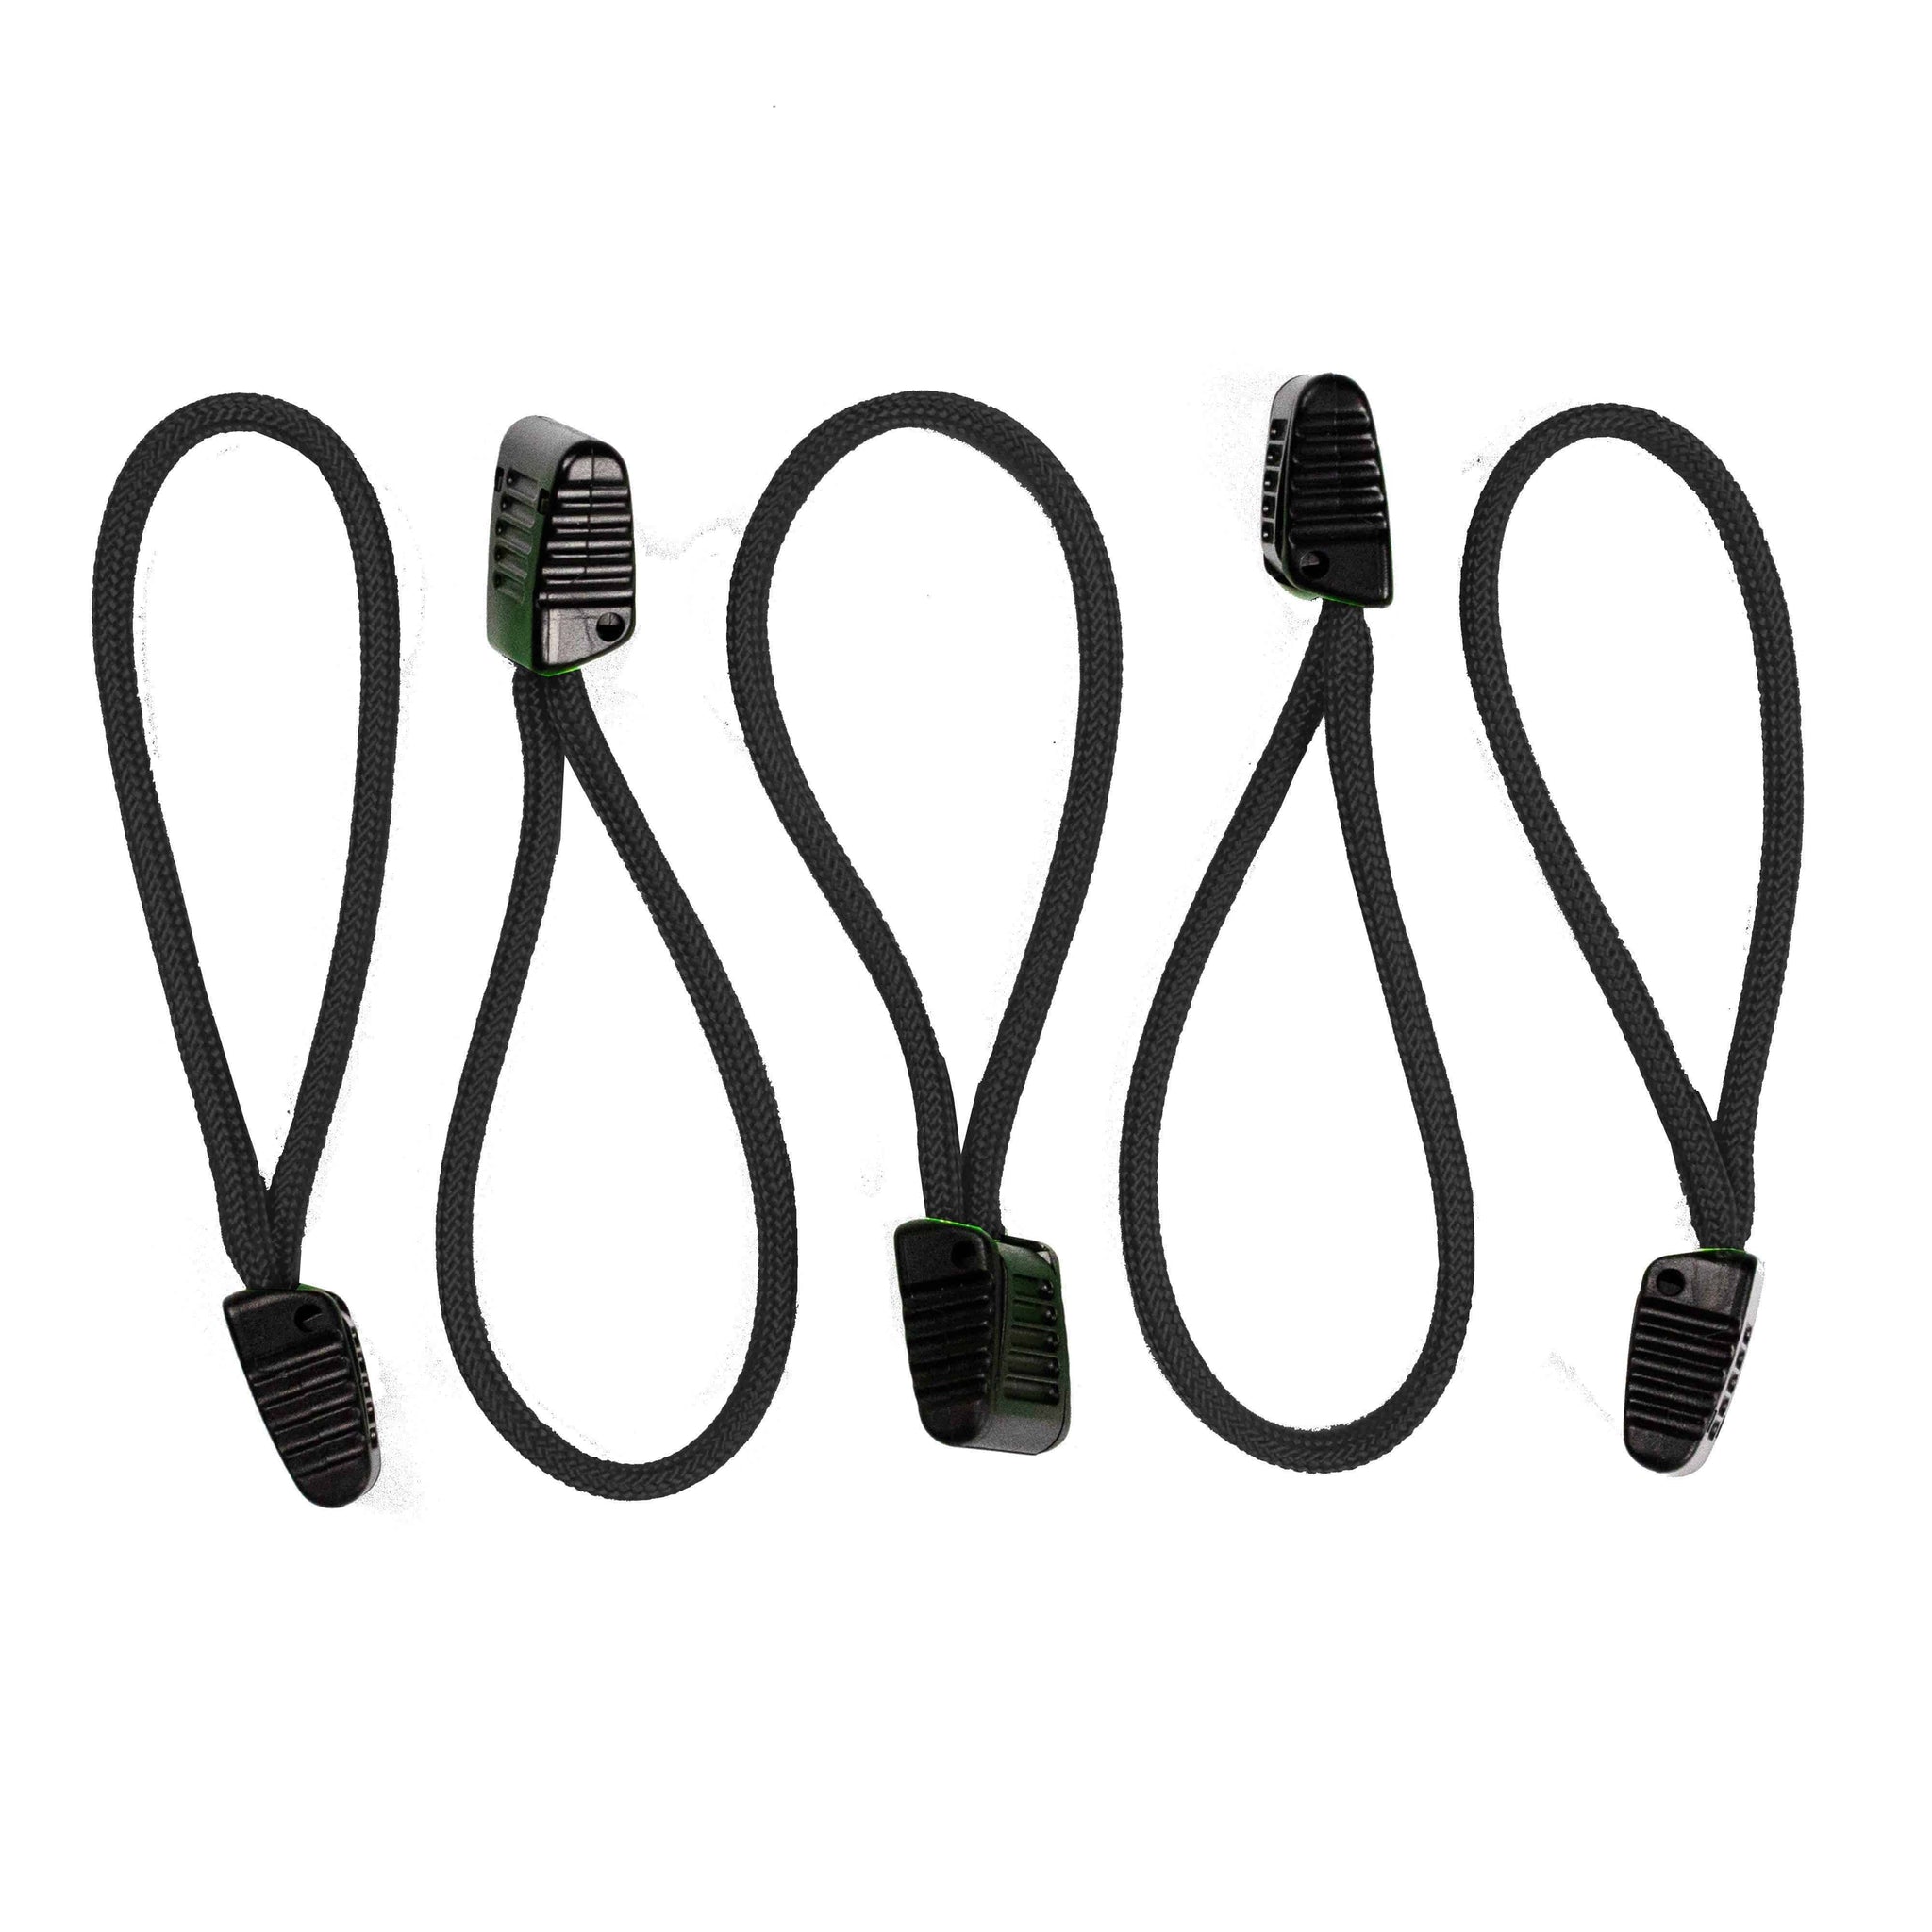 Paracord Planet Zipper Pulls Available in Various Color Combinations 5 Pack  Black/Black 5 Pack